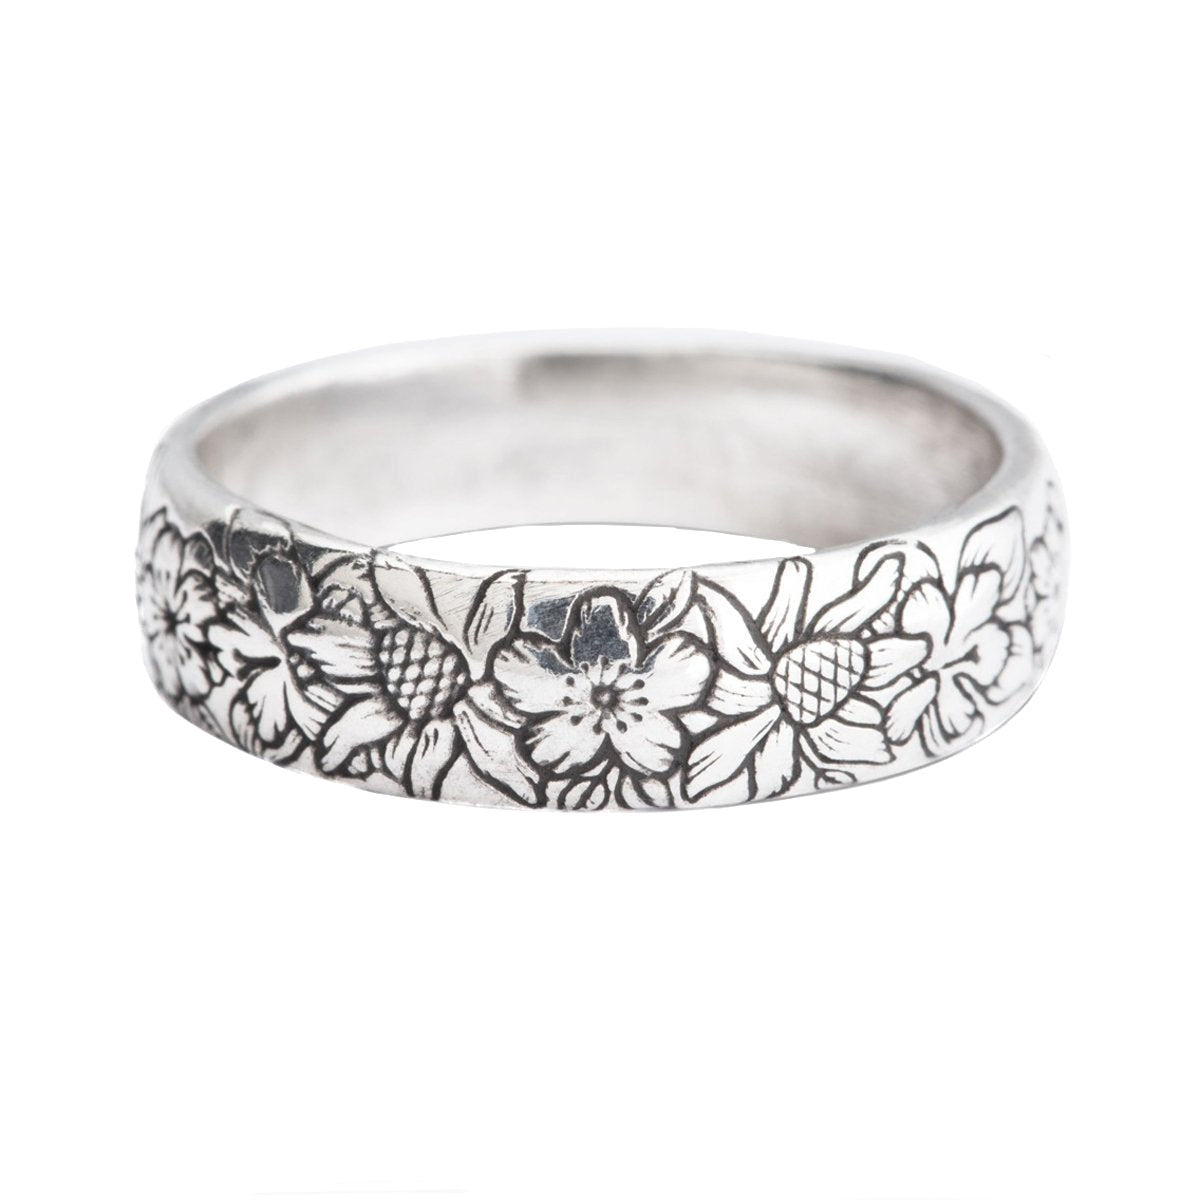 Floral Wreath Band